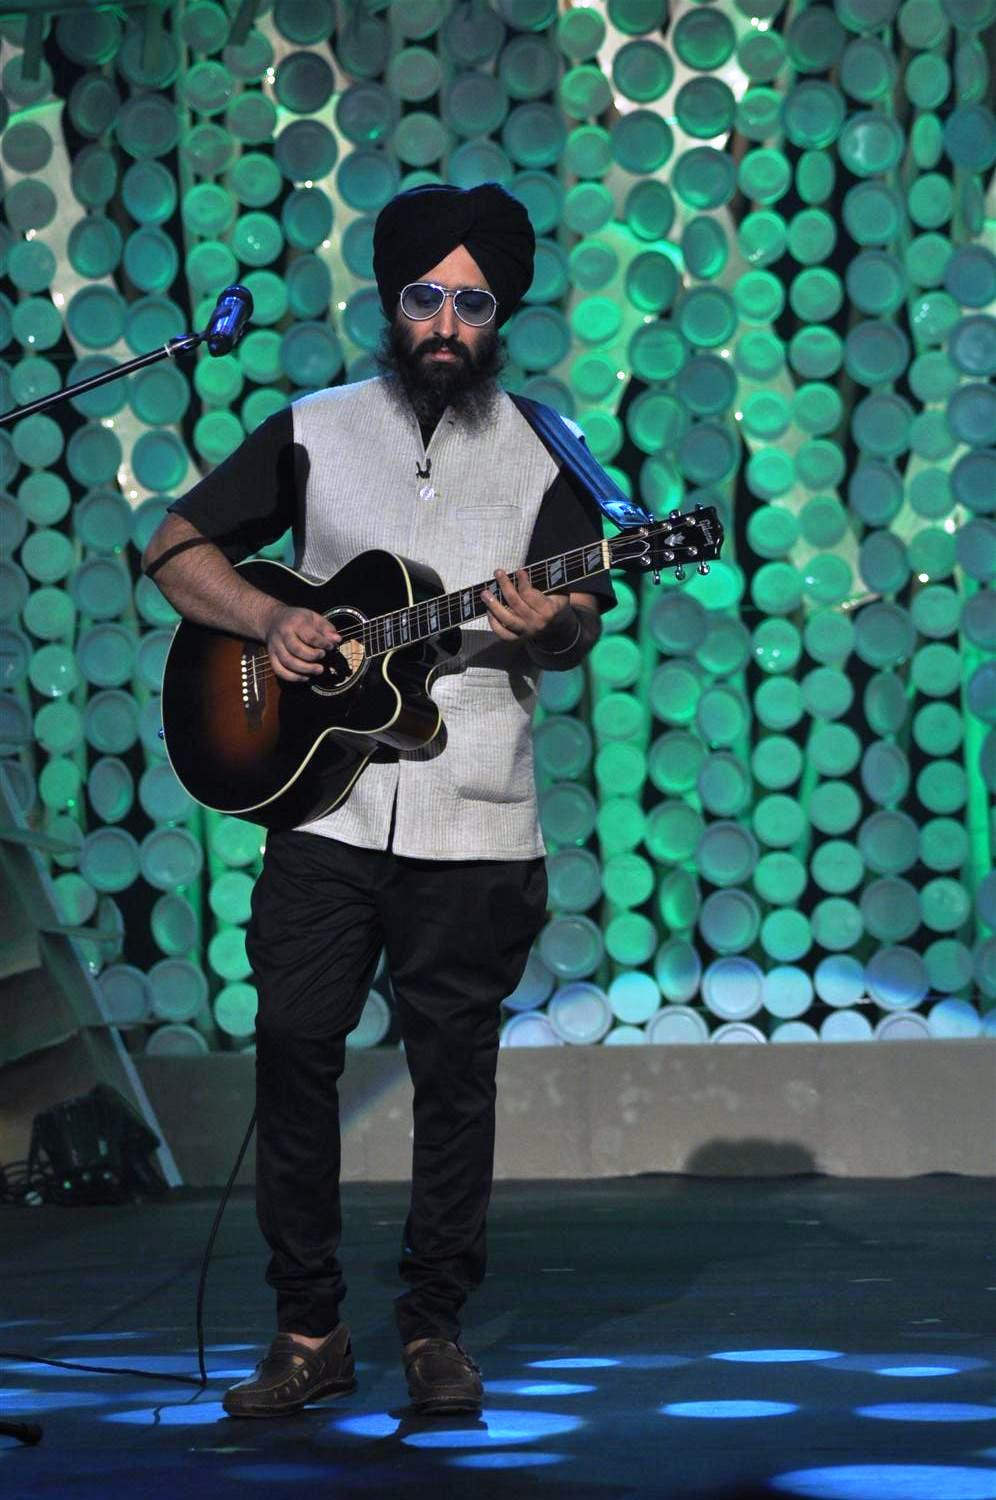 Rabbi Shergill Is Playing Guitar During Stage Show